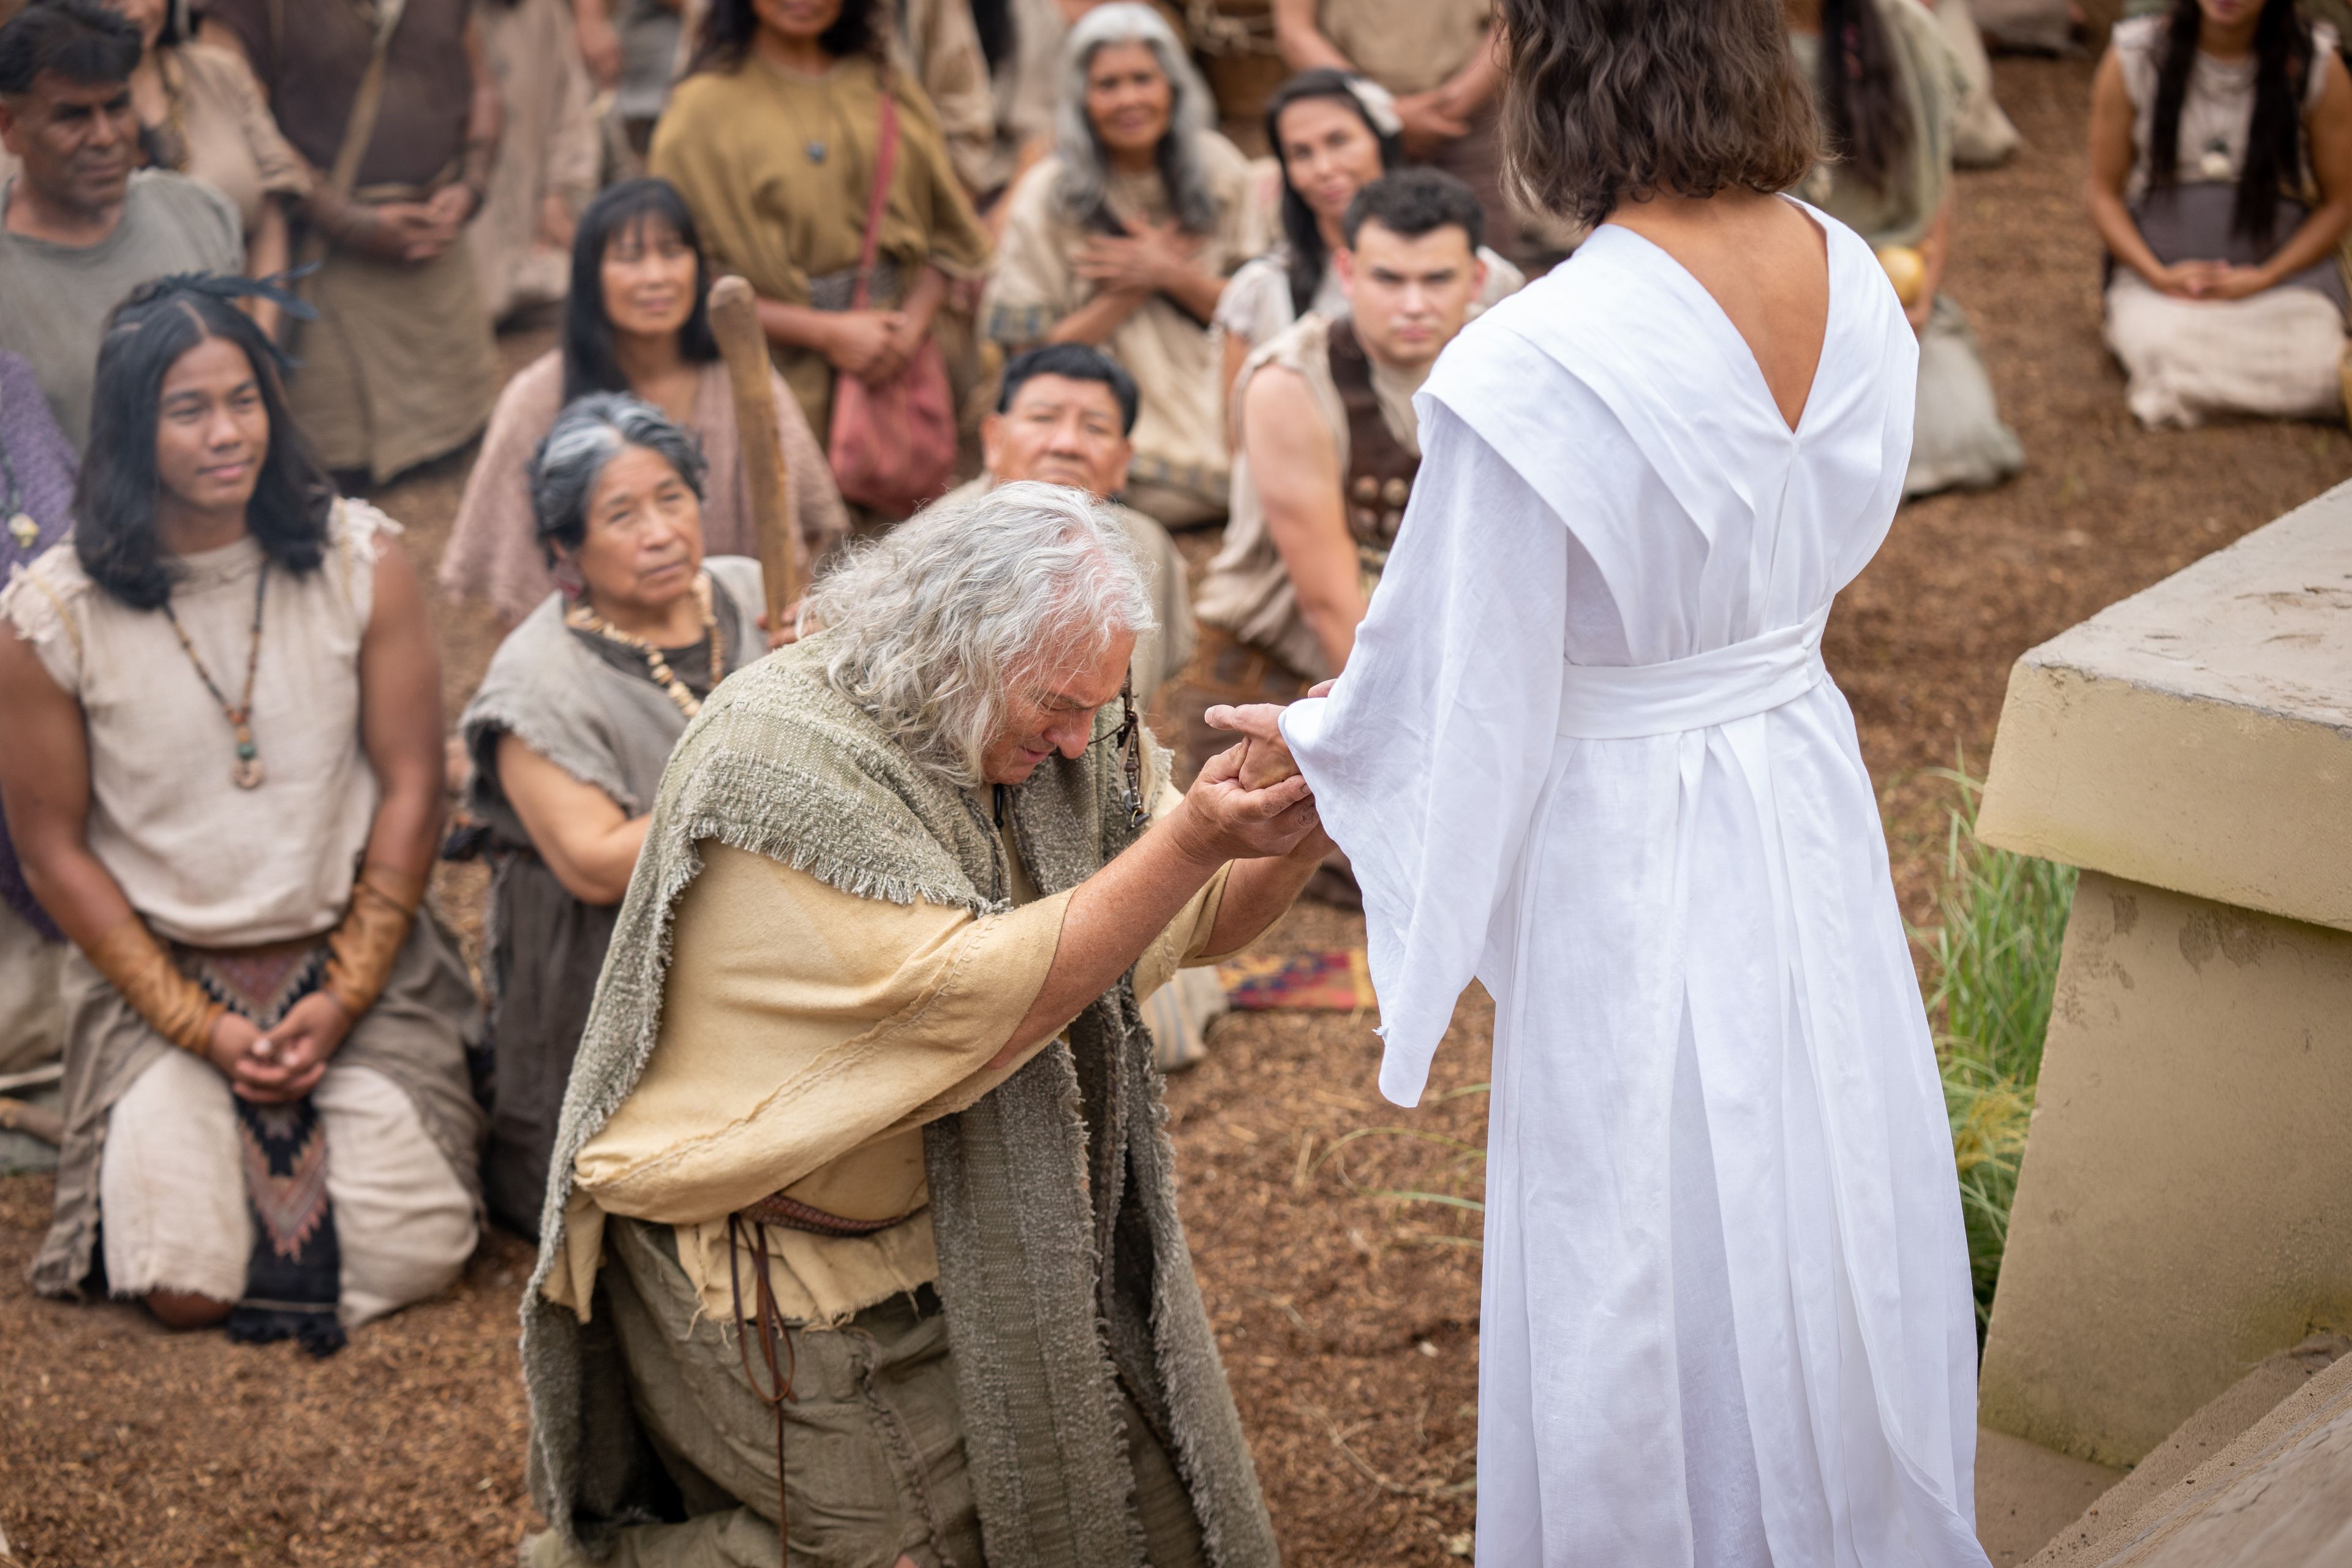 Jesus Christ comes to the Nephites. Nephi, son of Nephi, kneels before the Savior.